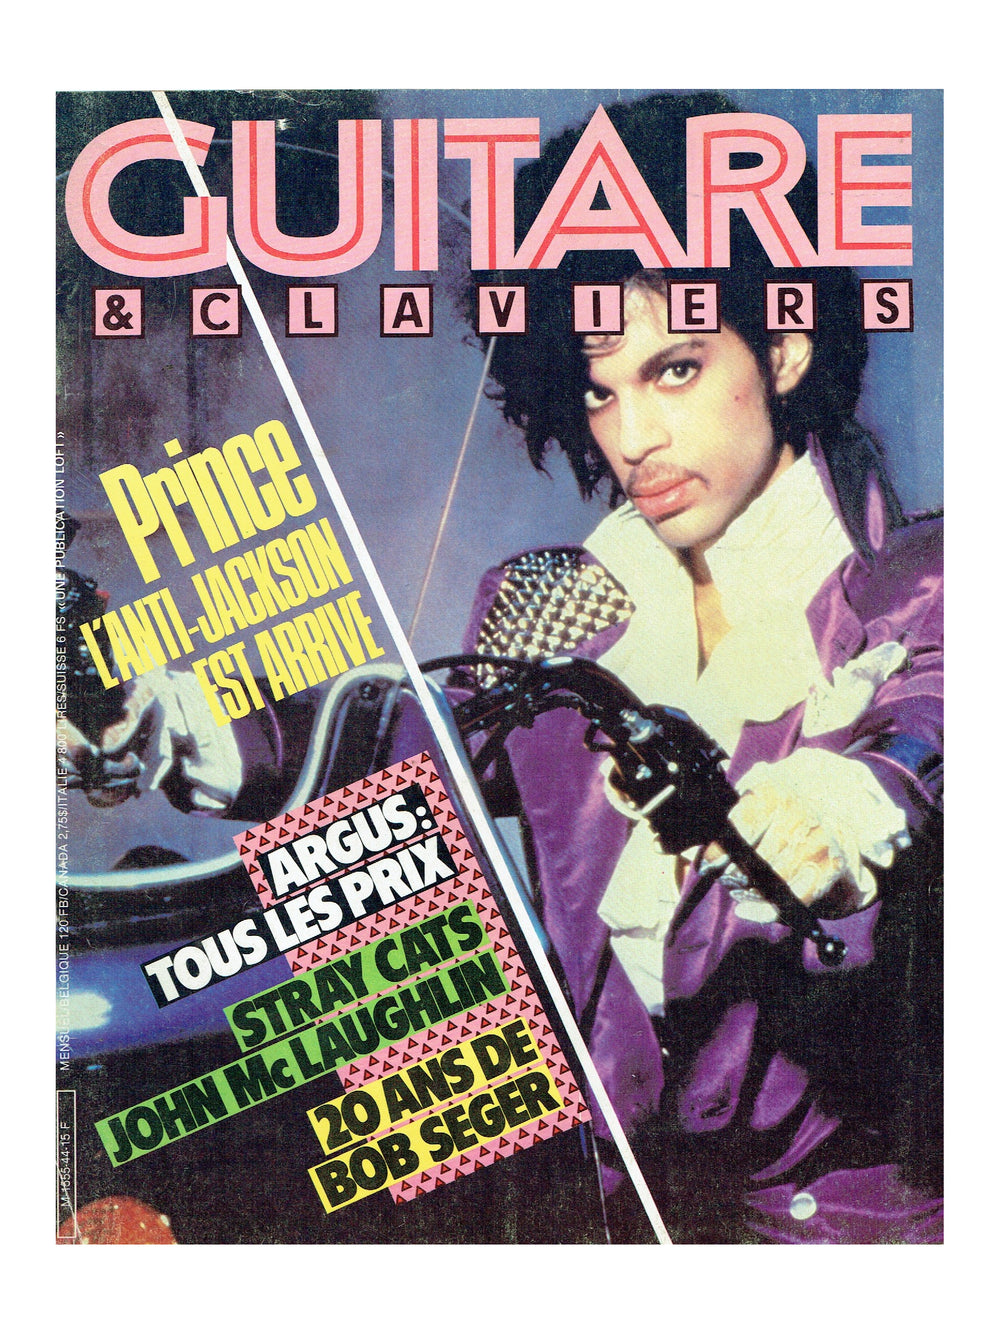 Prince – Guitare & Claviers Magazine Cover Ideal For Framing